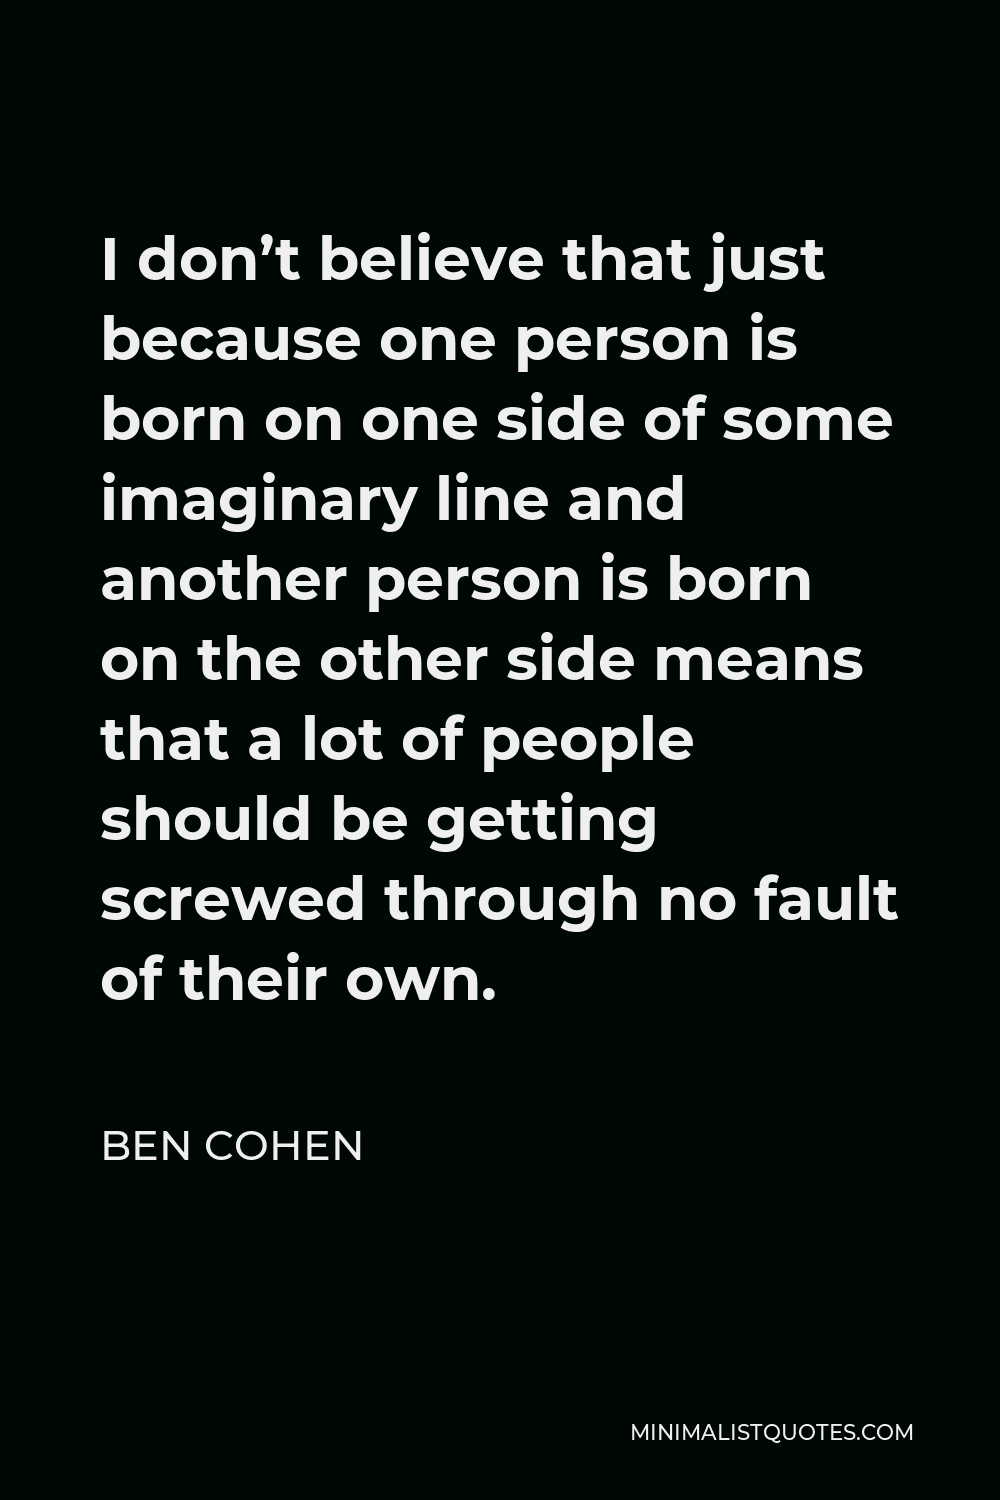 Ben Cohen Quote - I don’t believe that just because one person is born on one side of some imaginary line and another person is born on the other side means that a lot of people should be getting screwed through no fault of their own.